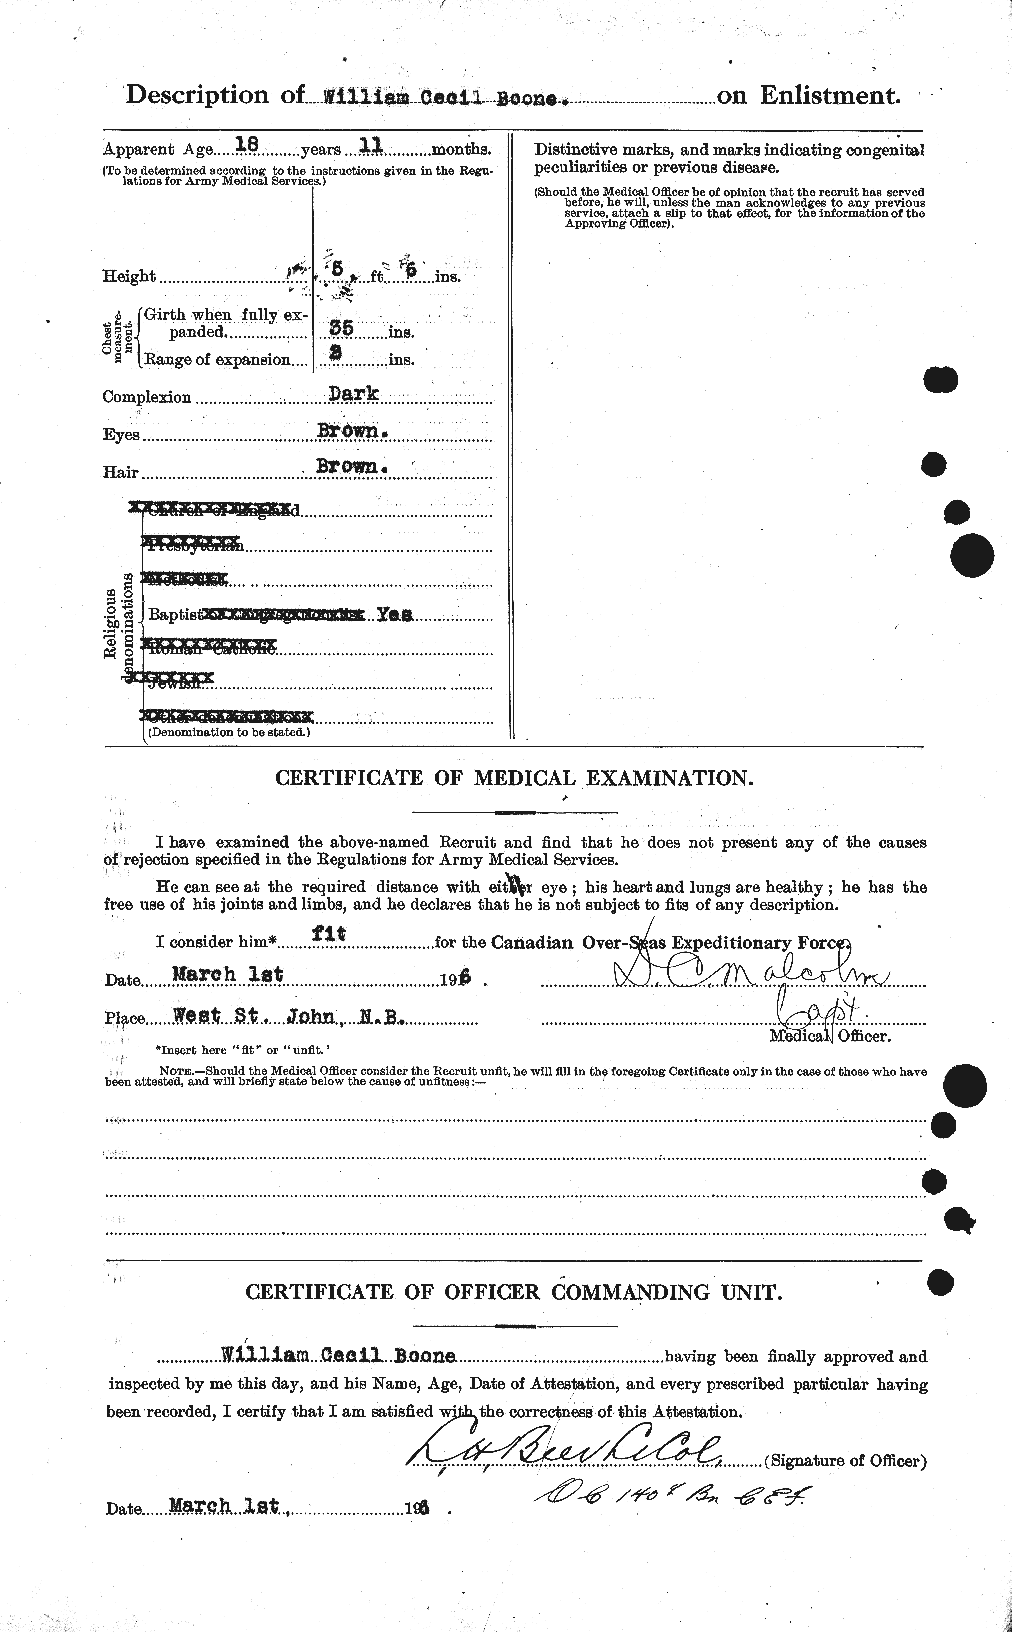 Personnel Records of the First World War - CEF 251357b